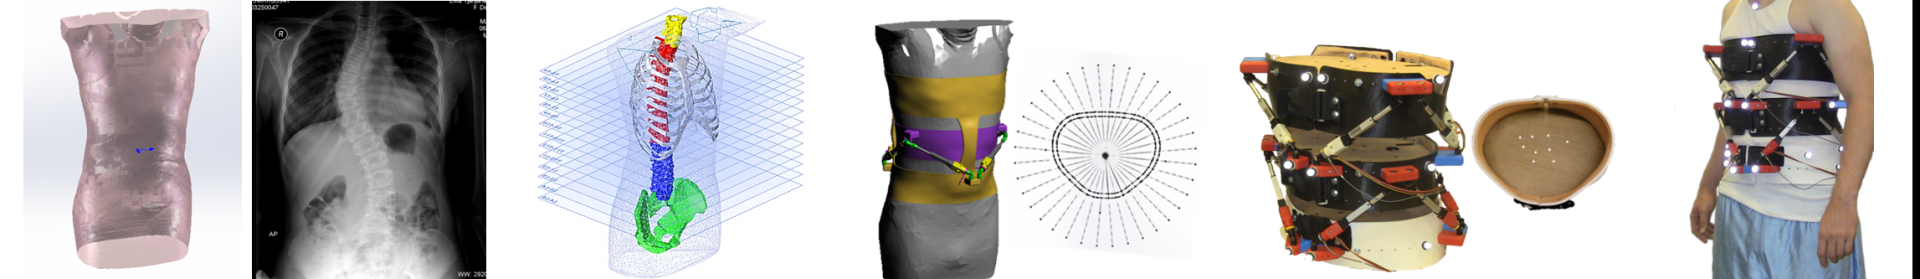 Figure illustrating the brace design process.  From left to right: a 3D scan of a body, a torso x-ray, a CAD model of the bones of the torso, a CAD model of a person wearing the brace, the fully assembled brace, and a man wearing the fully assembled brace